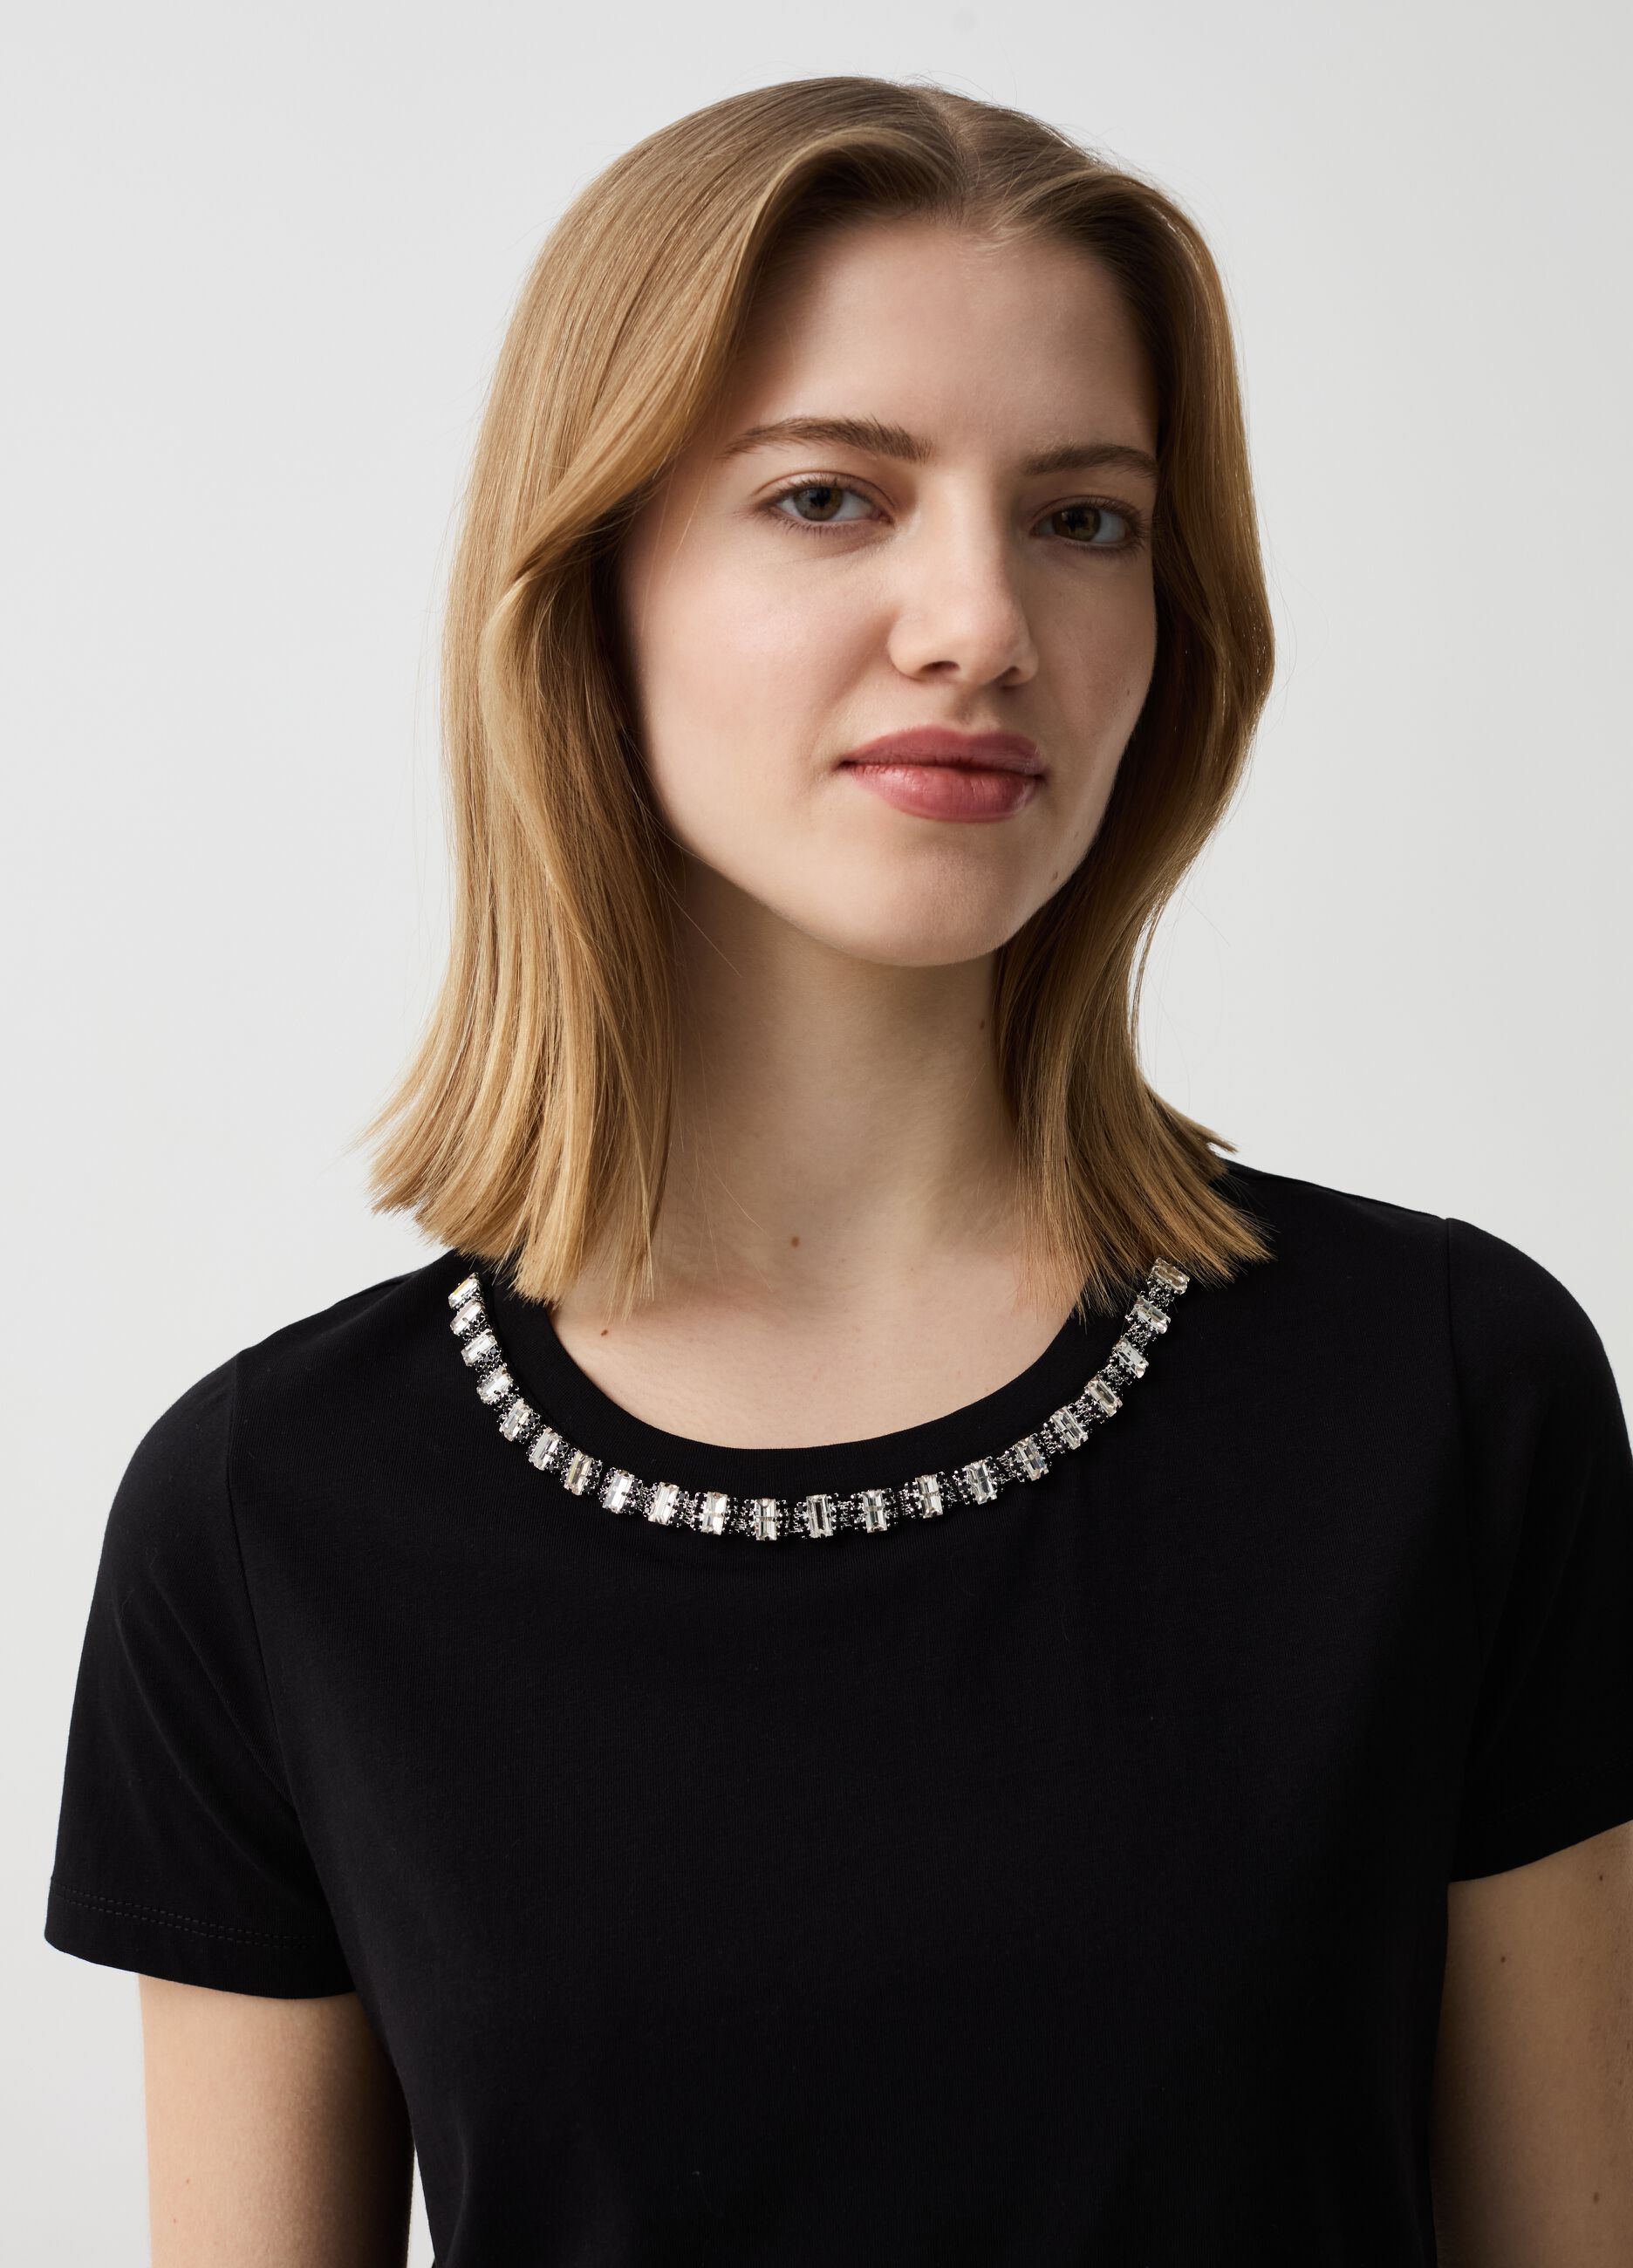 T-shirt with round neck and jewel application